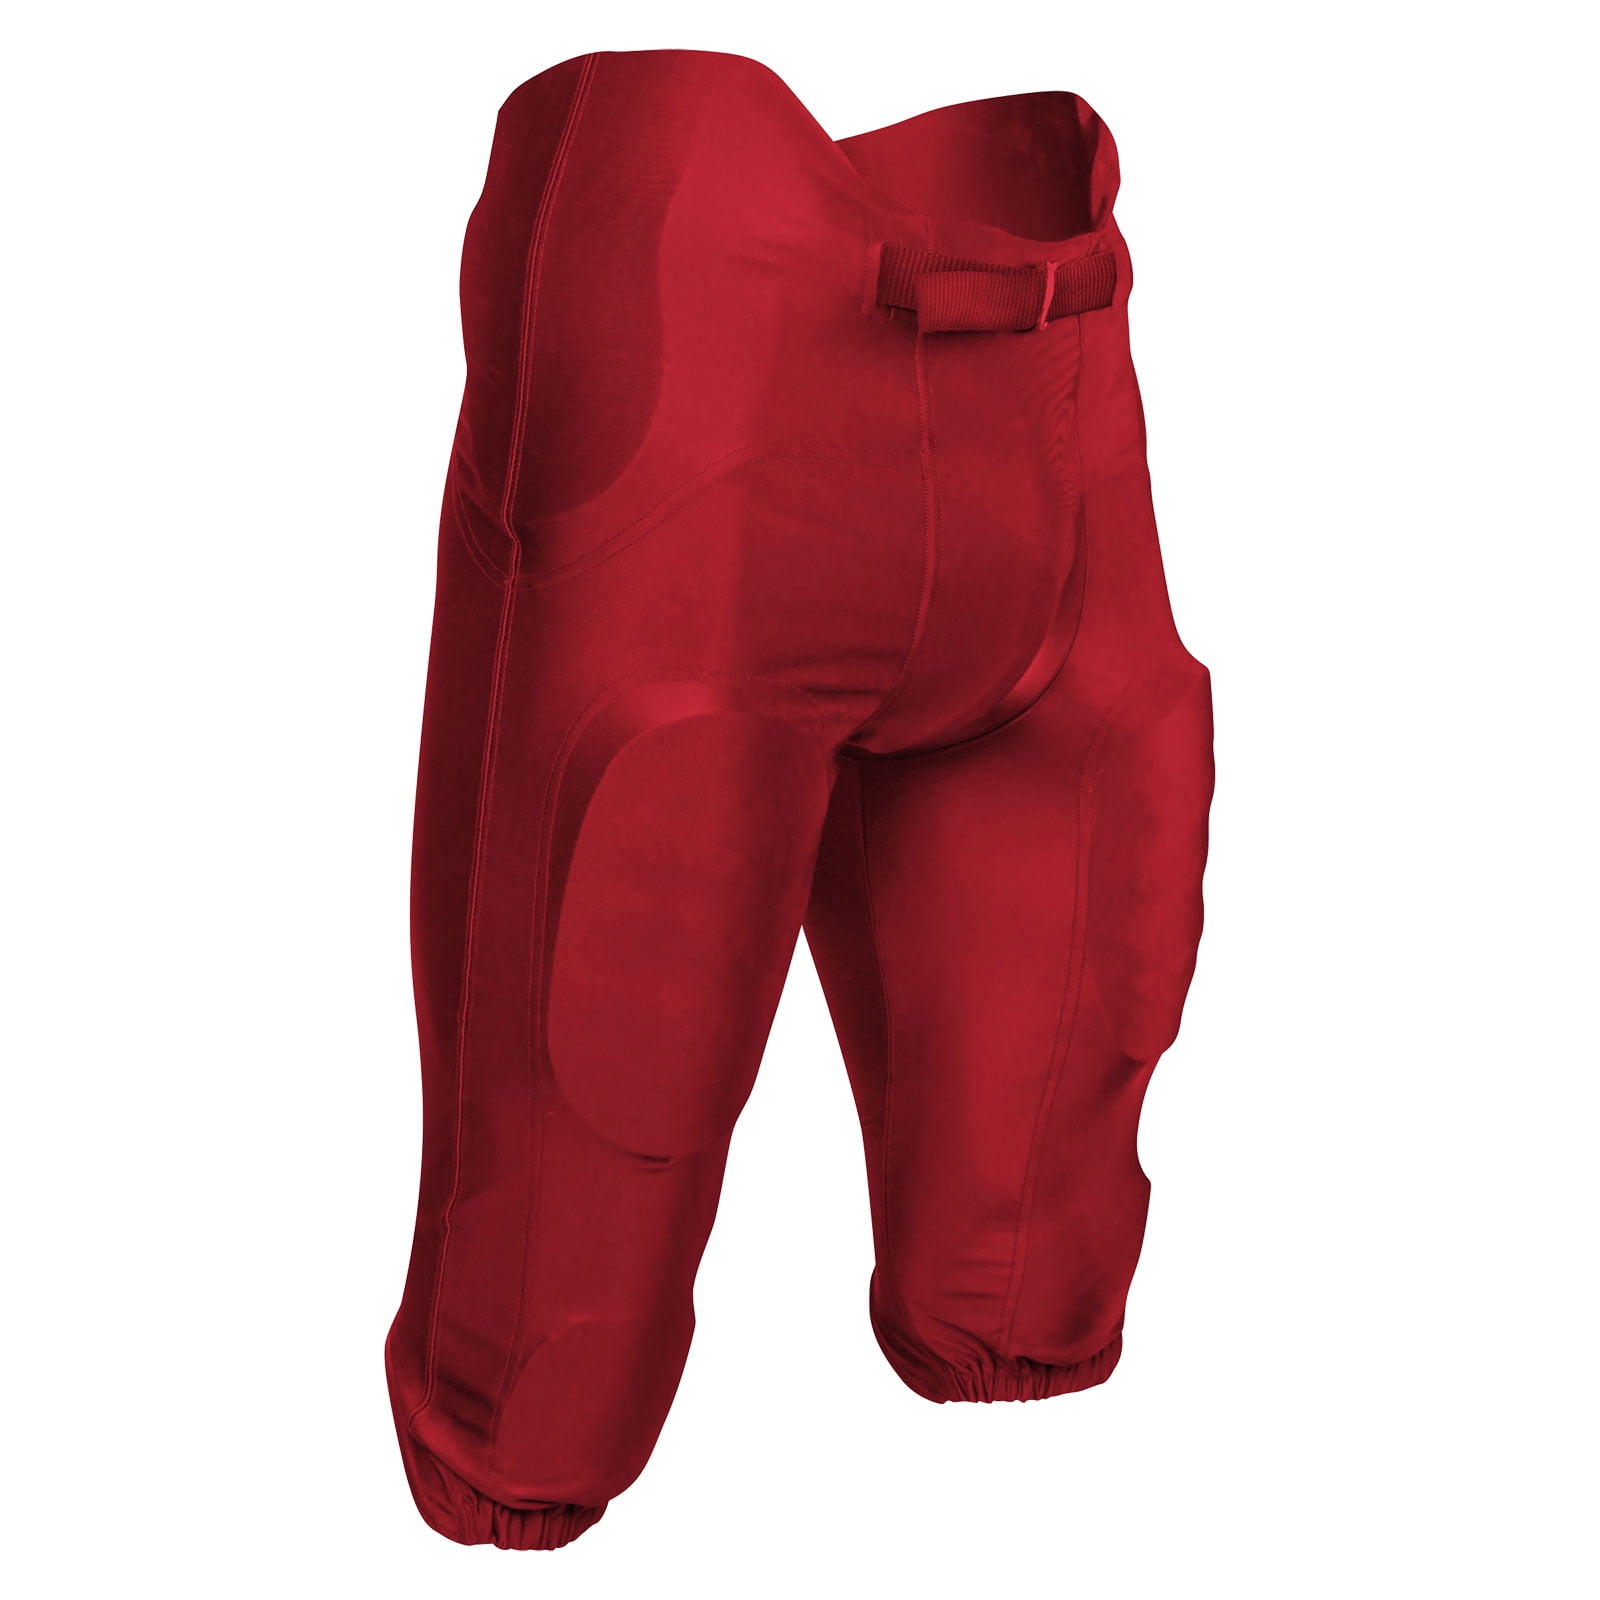 NEW Lists @ $25 Champro Integrated Youth Football Game Pants With Pads Scarlet 